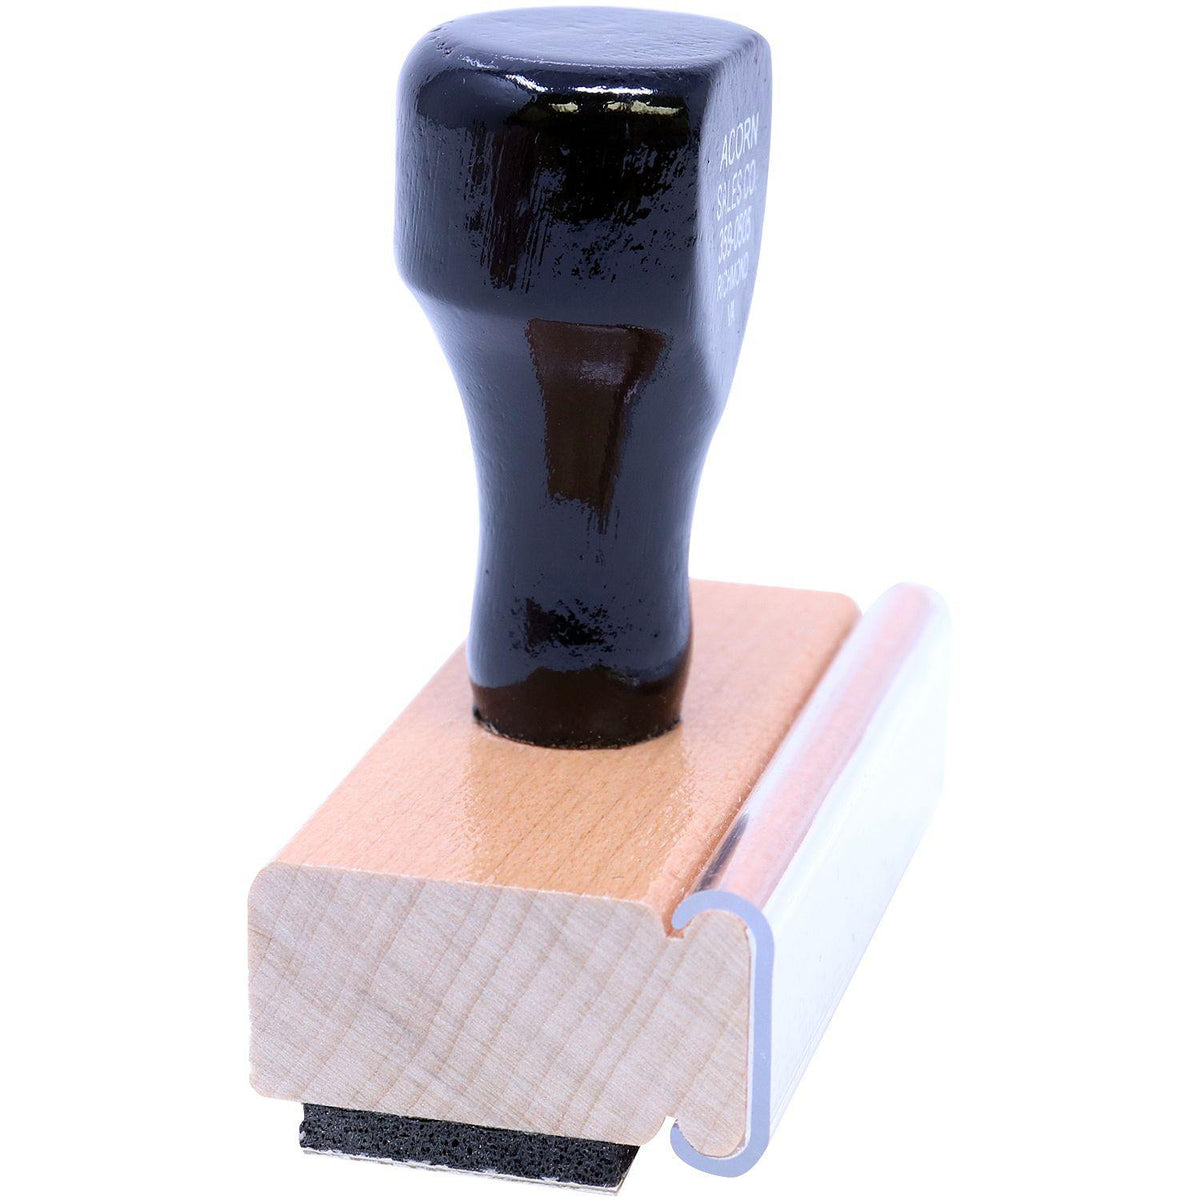 Side View of Bright Idea Rubber Stamp at an Angle